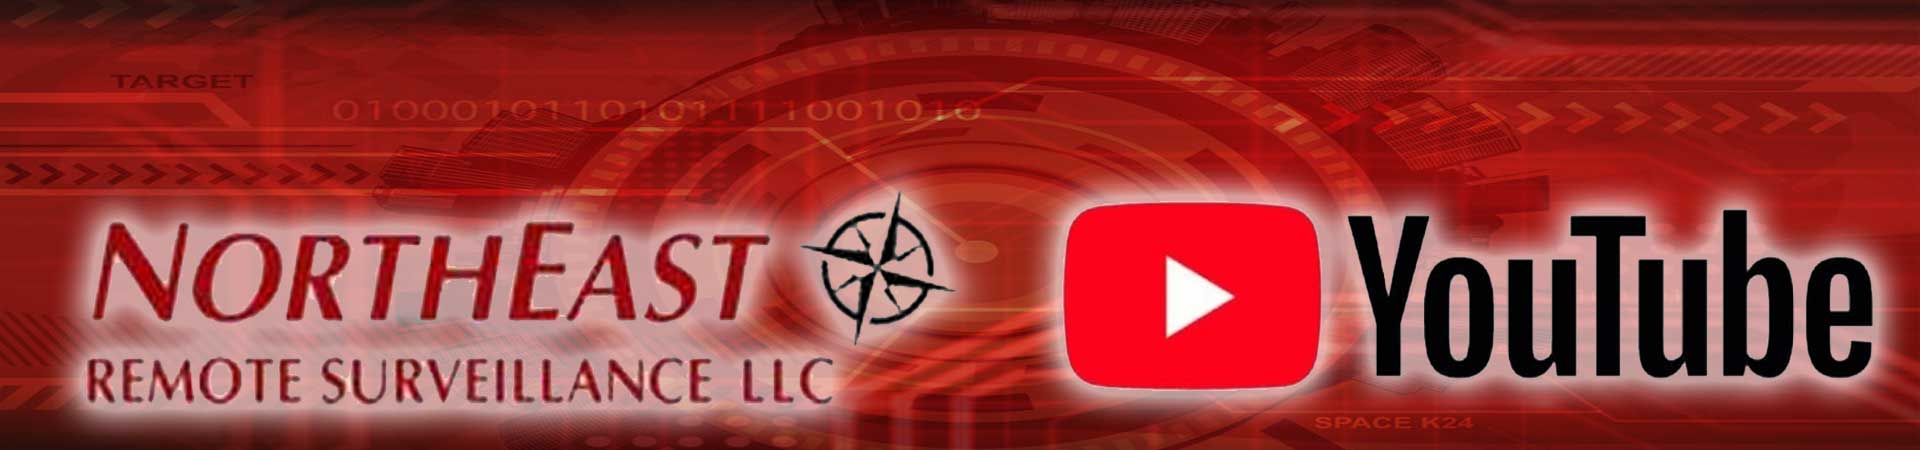 Check out Northeast Remote and Surveillance on You Tube!